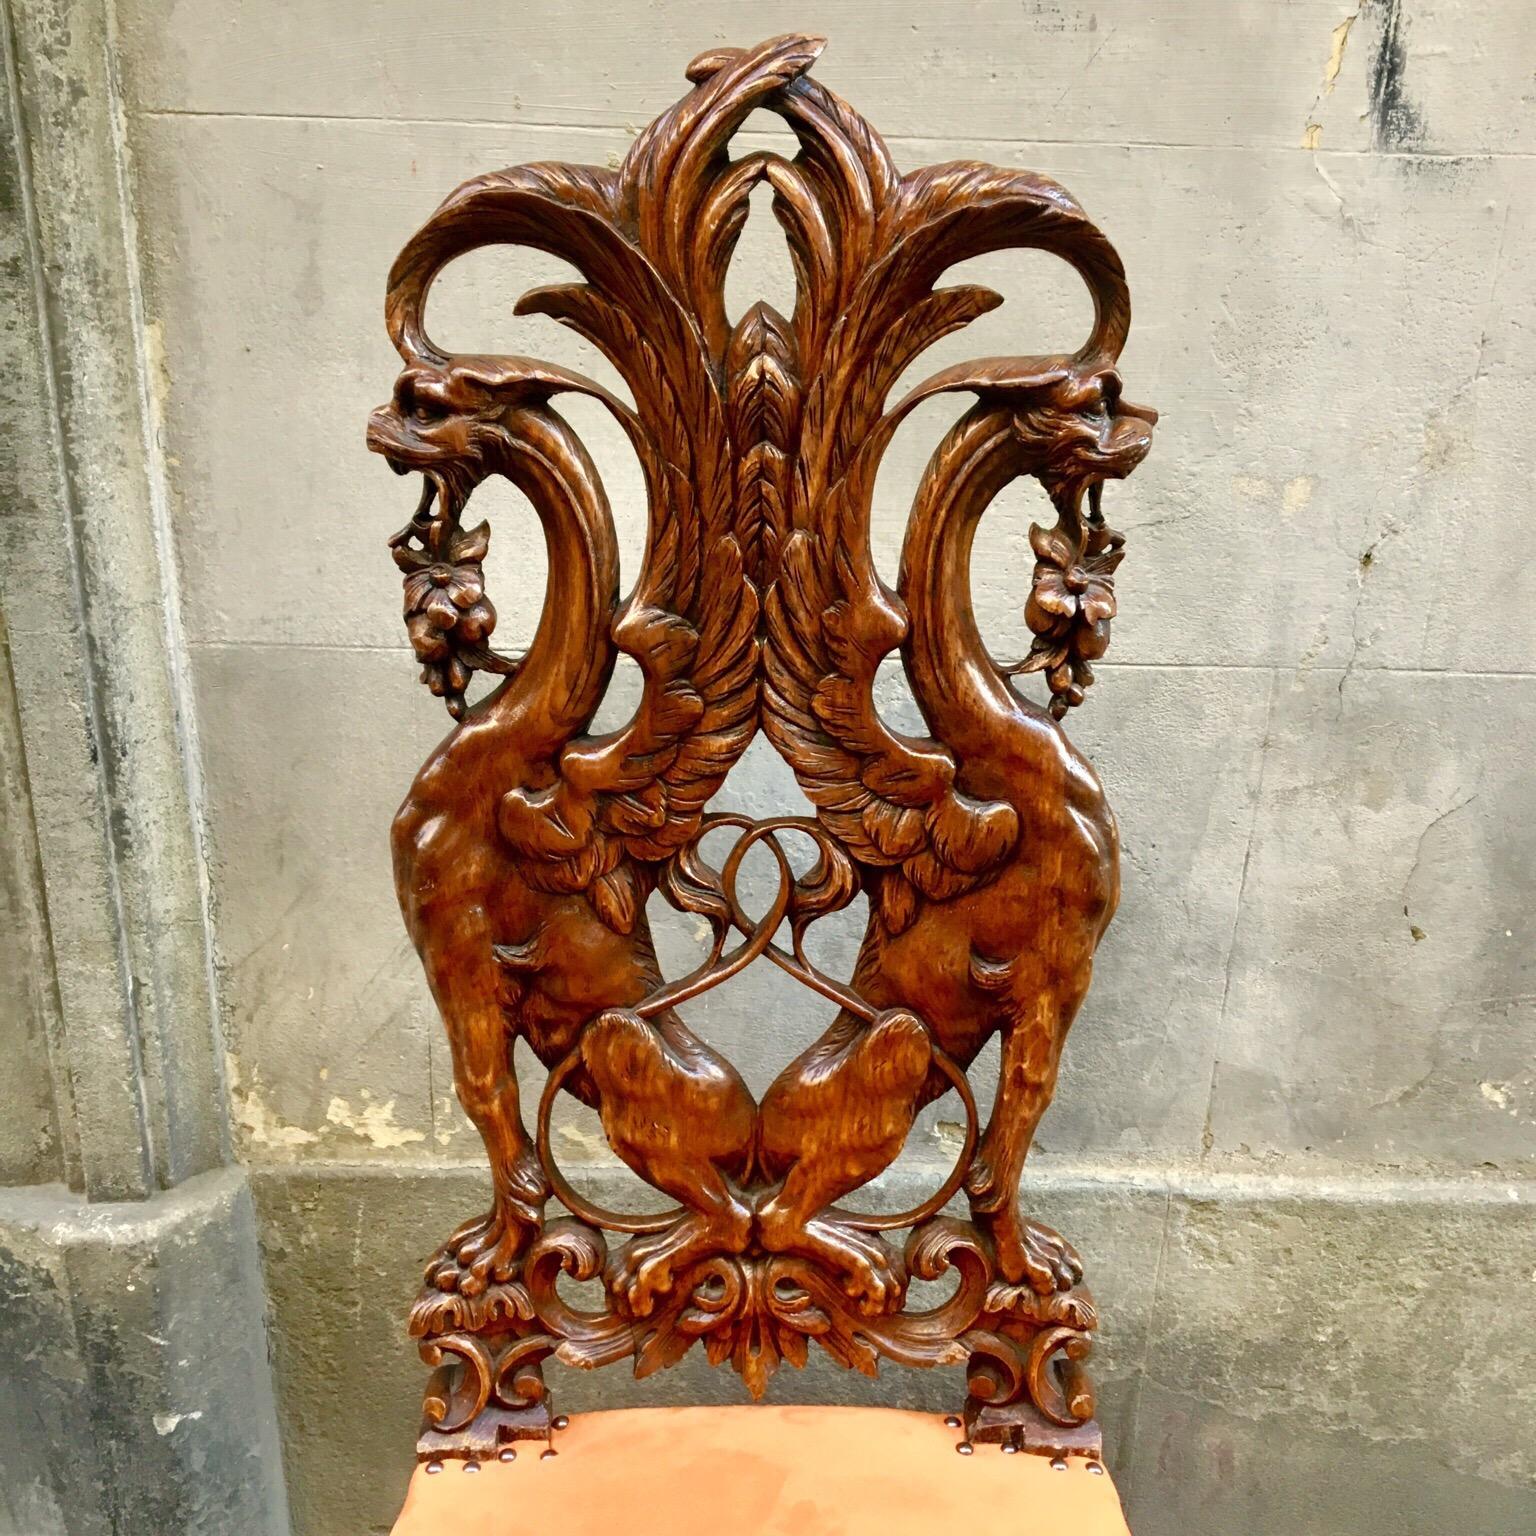 Pair of Carved Renaissance-Style Wooden Chairs Orange Alcantara Seat, Early 1900 9